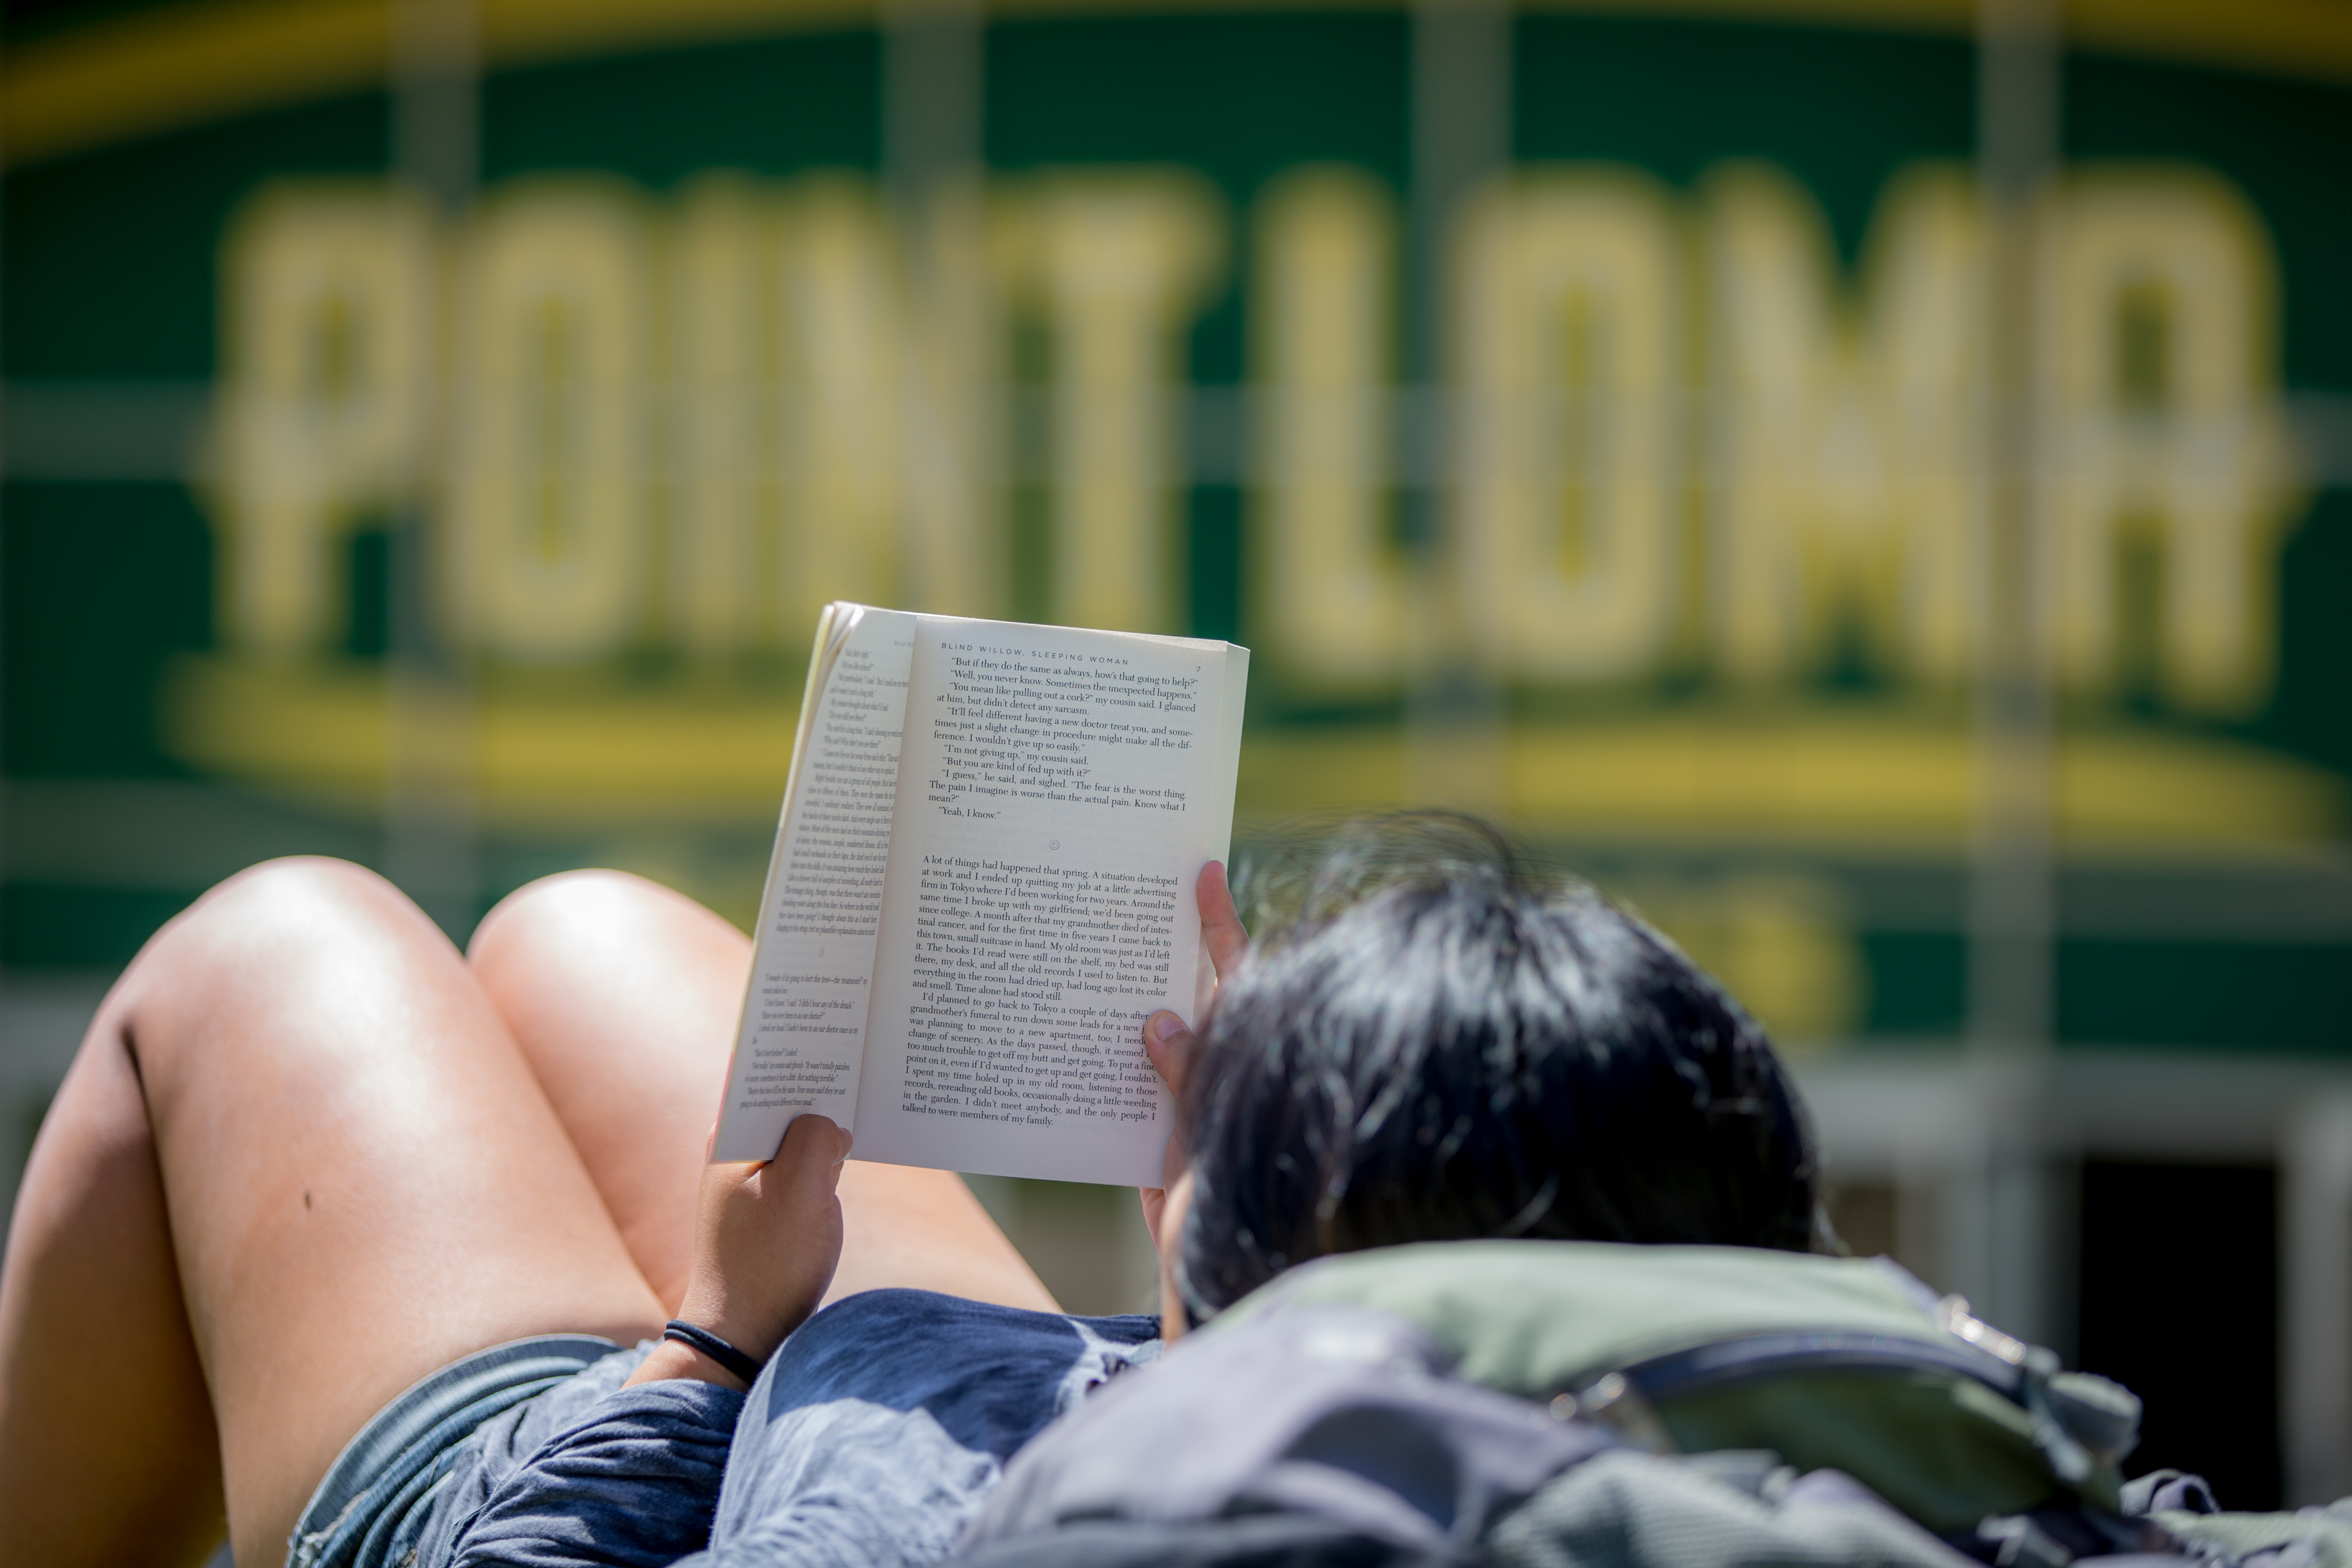 A female student with black hair is laying down outside in the sunshine. She is leaning her head on her backpack and is reading a book.